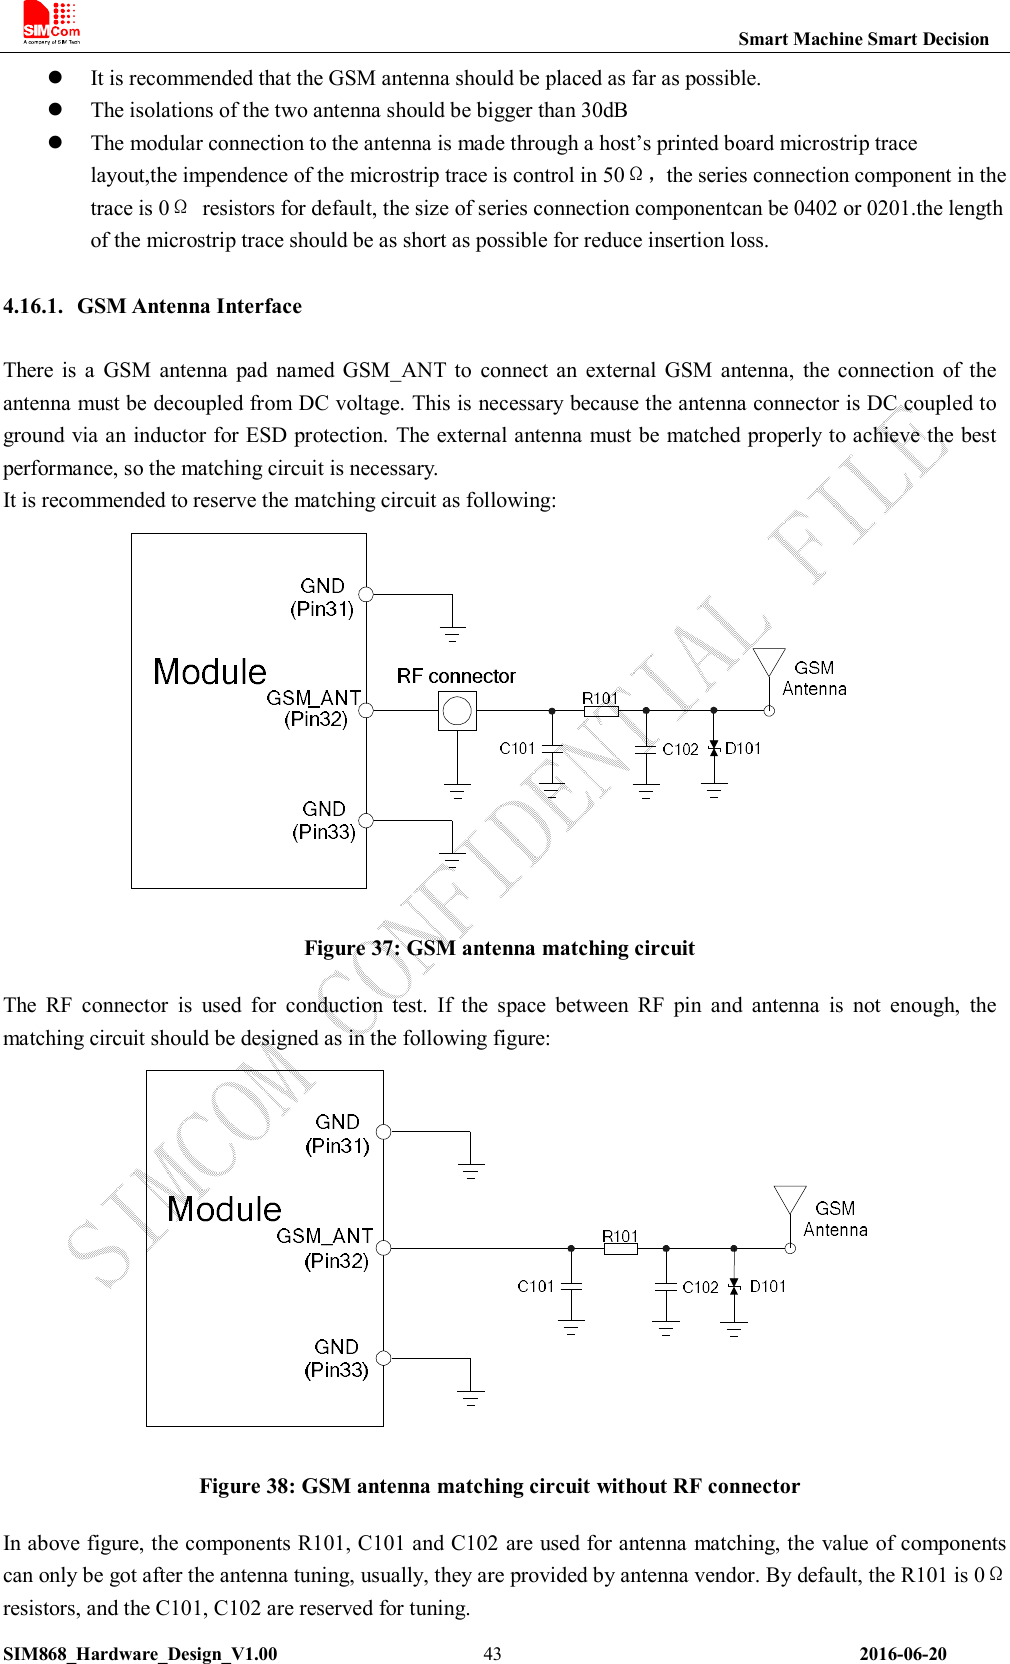                                                                       Smart Machine Smart Decision SIM868_Hardware_Design_V1.00                      43                                                                2016-06-20  It is recommended that the GSM antenna should be placed as far as possible.  The isolations of the two antenna should be bigger than 30dB  The modular connection to the antenna is made through a host’s printed board microstrip trace layout,the impendence of the microstrip trace is control in 50Ω，the series connection component in the trace is 0Ω  resistors for default, the size of series connection componentcan be 0402 or 0201.the length of the microstrip trace should be as short as possible for reduce insertion loss.  4.16.1. GSM Antenna Interface  There  is  a  GSM  antenna  pad  named  GSM_ANT  to  connect  an  external  GSM  antenna,  the  connection  of  the antenna must be decoupled from DC voltage. This is necessary because the antenna connector is DC coupled to ground via an inductor for ESD protection. The external antenna must be matched properly to achieve the best performance, so the matching circuit is necessary. It is recommended to reserve the matching circuit as following:  Figure 37: GSM antenna matching circuit The  RF  connector  is  used  for  conduction  test.  If  the  space  between  RF  pin  and  antenna  is  not  enough,  the matching circuit should be designed as in the following figure:  Figure 38: GSM antenna matching circuit without RF connector In above figure, the components R101, C101 and C102 are used for antenna matching, the value of components can only be got after the antenna tuning, usually, they are provided by antenna vendor. By default, the R101 is 0Ω resistors, and the C101, C102 are reserved for tuning.   